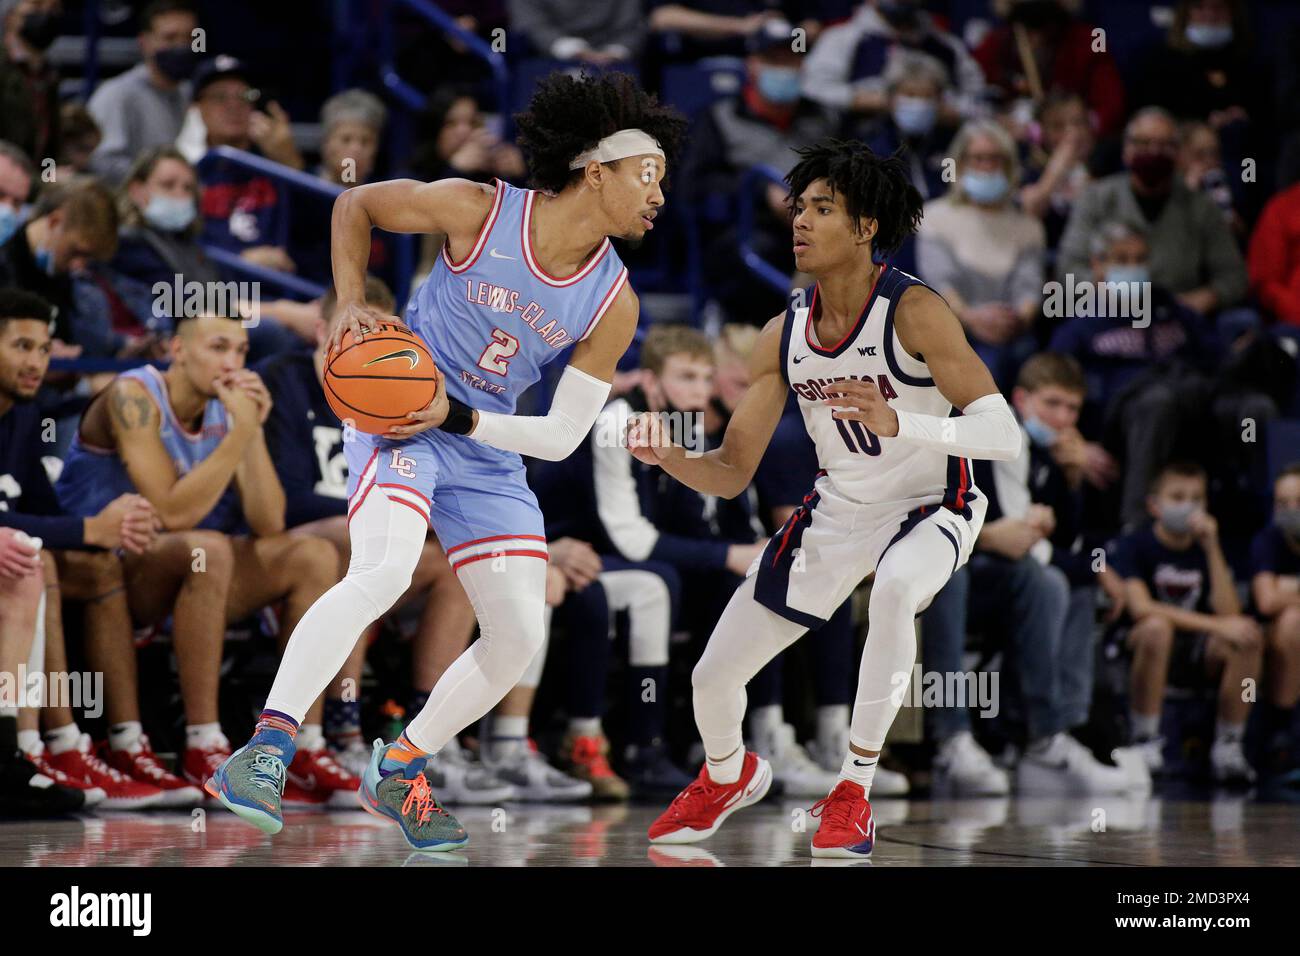 Lewis-Clark State guard Khalil Stevenson (2) controls the ball while  defended by Gonzaga guard Hunter Sallis (10) during the second half of a college  basketball exhibition game, Friday, Nov. 5, 2021, in